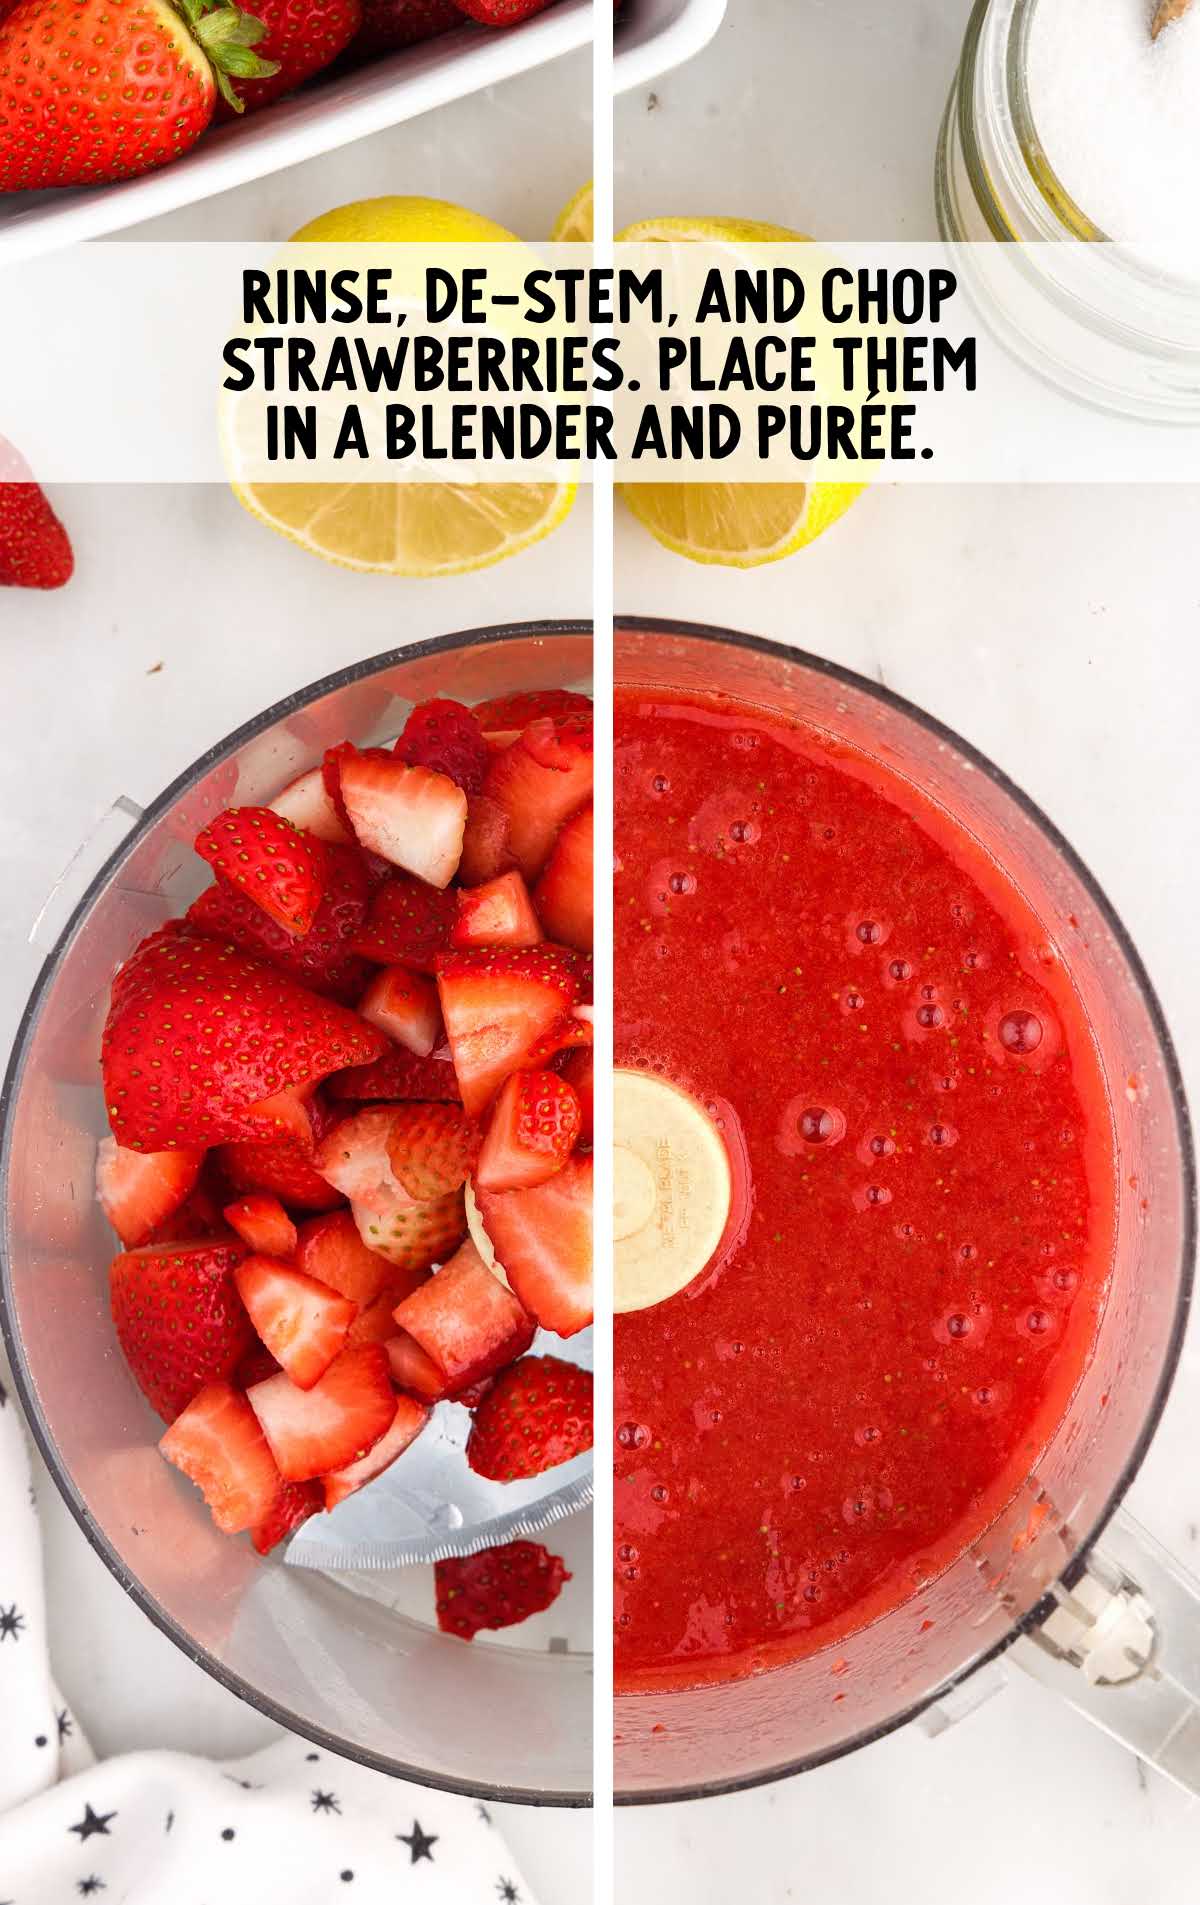 rinse and chop strawberries and place in a blender